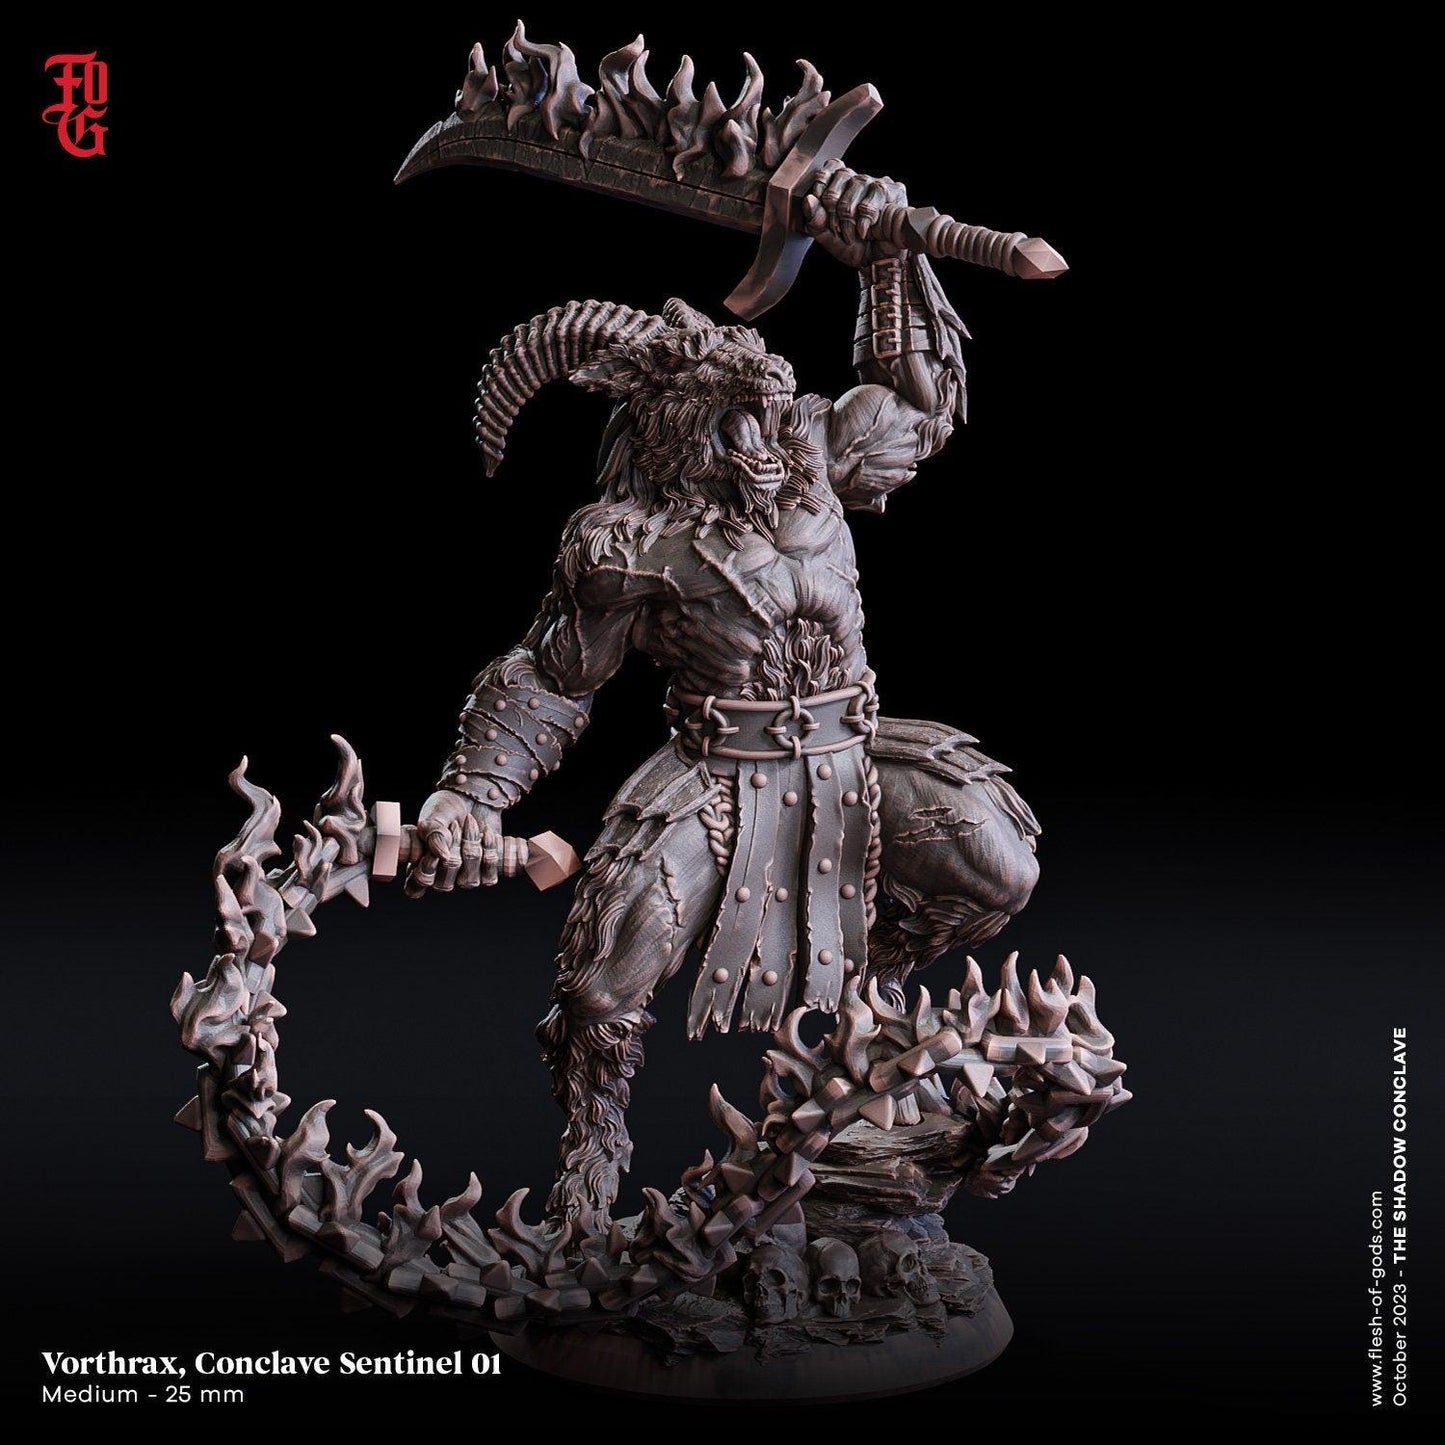 Vorthrax, Conclave Sentinel DnD Fiend Miniature | Mysterious Enforcer for Tabletop Adventures | 32mm Scale - Plague Miniatures shop for DnD Miniatures